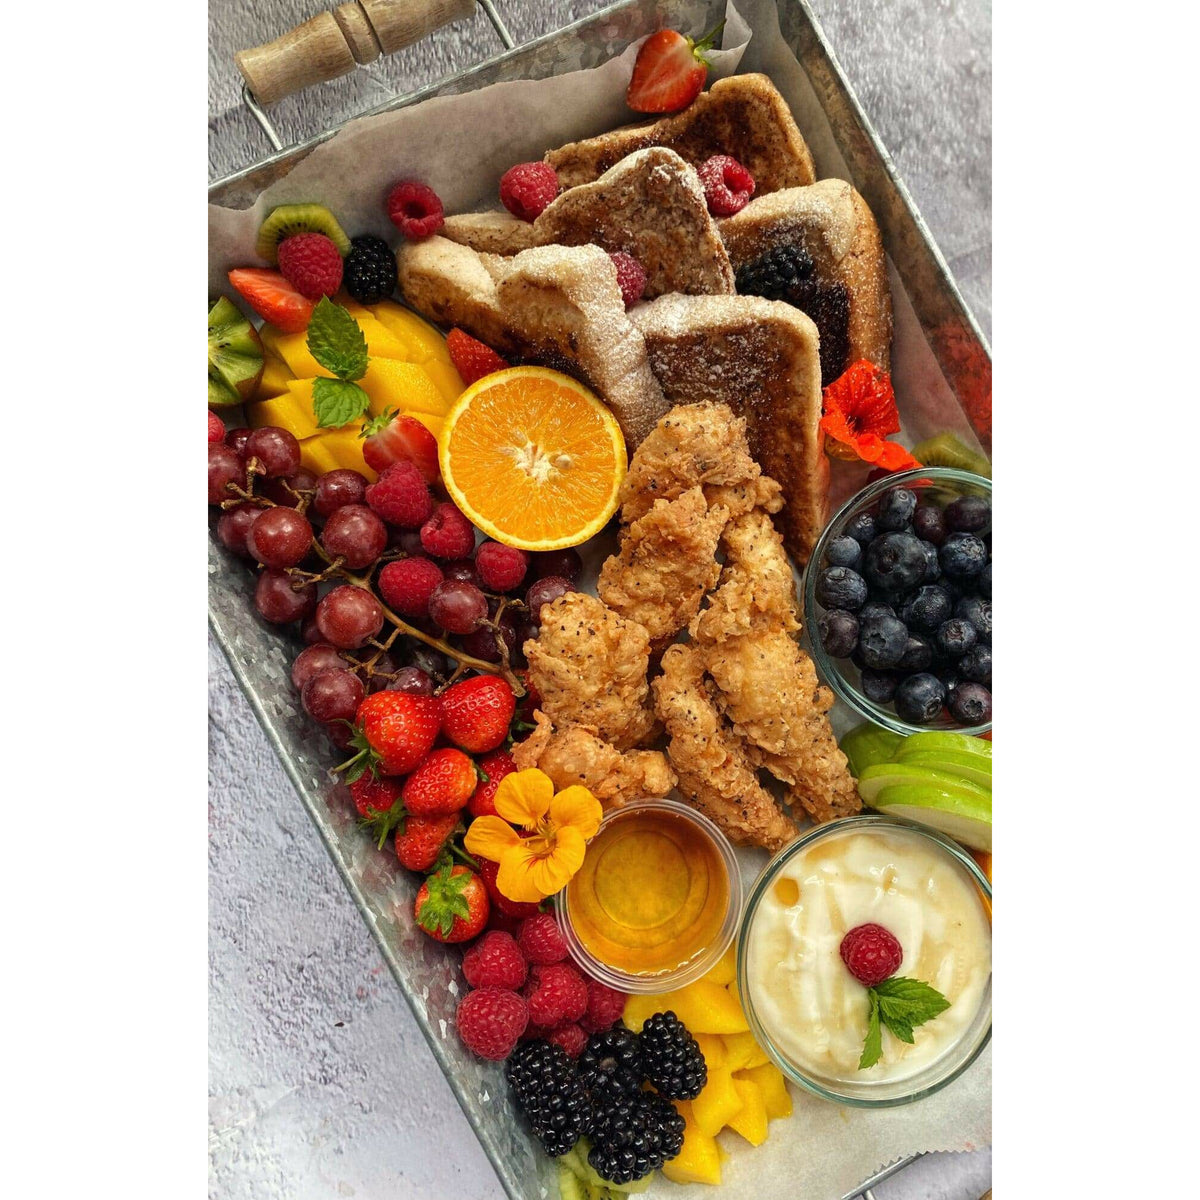 Medium Breakfast Platter (Pick up and Local Delivery)